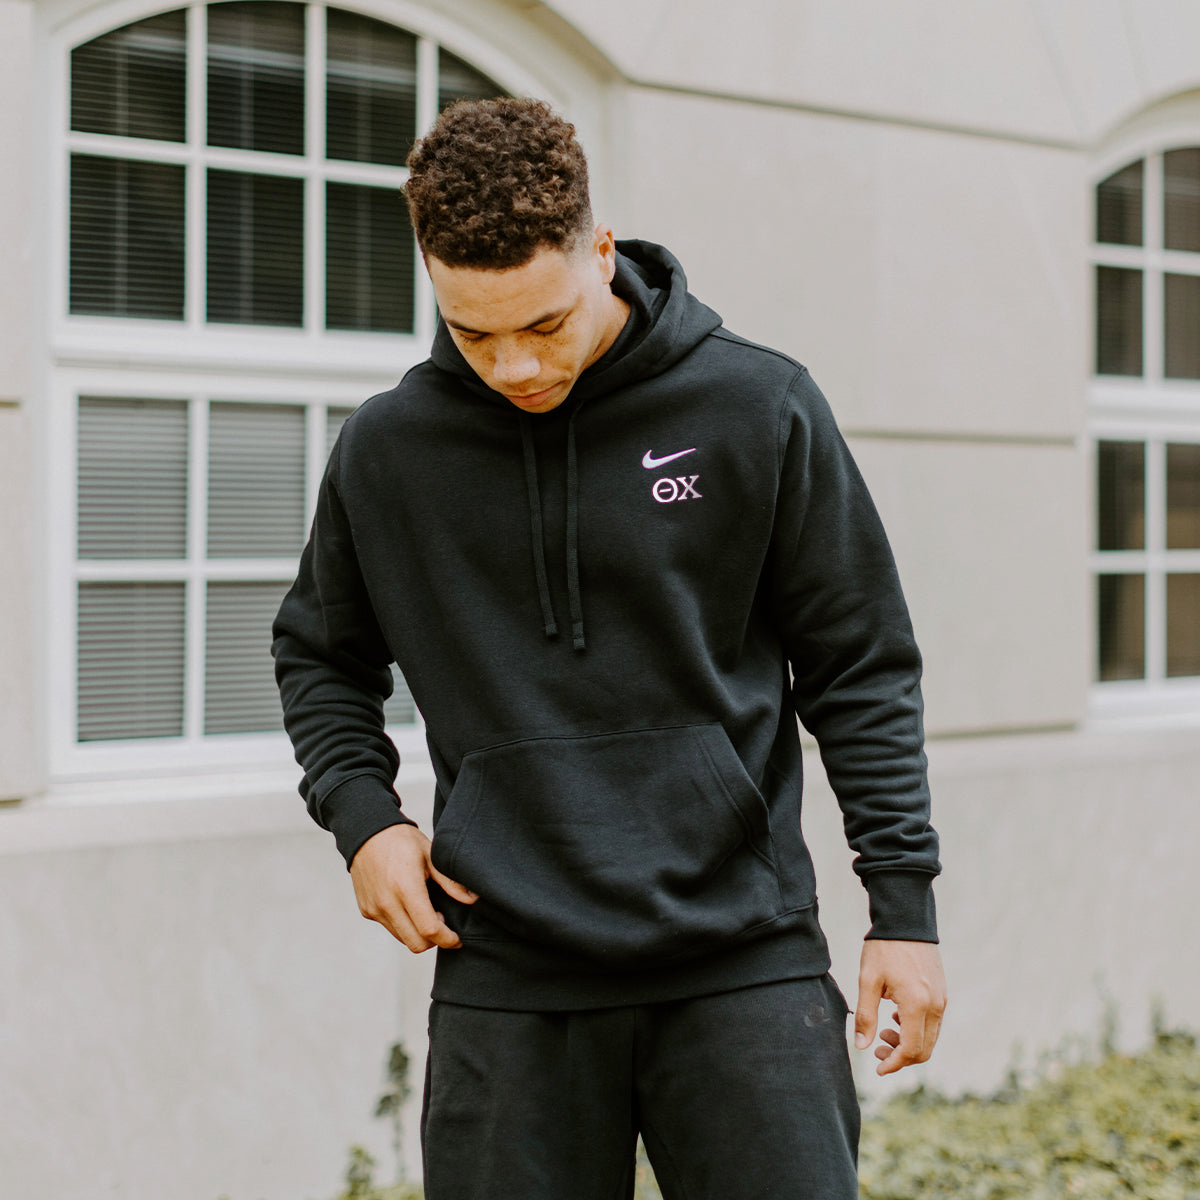 menigte effect Staat Theta Chi Nike Black Embroidered Hoodie – Theta Chi Official Store